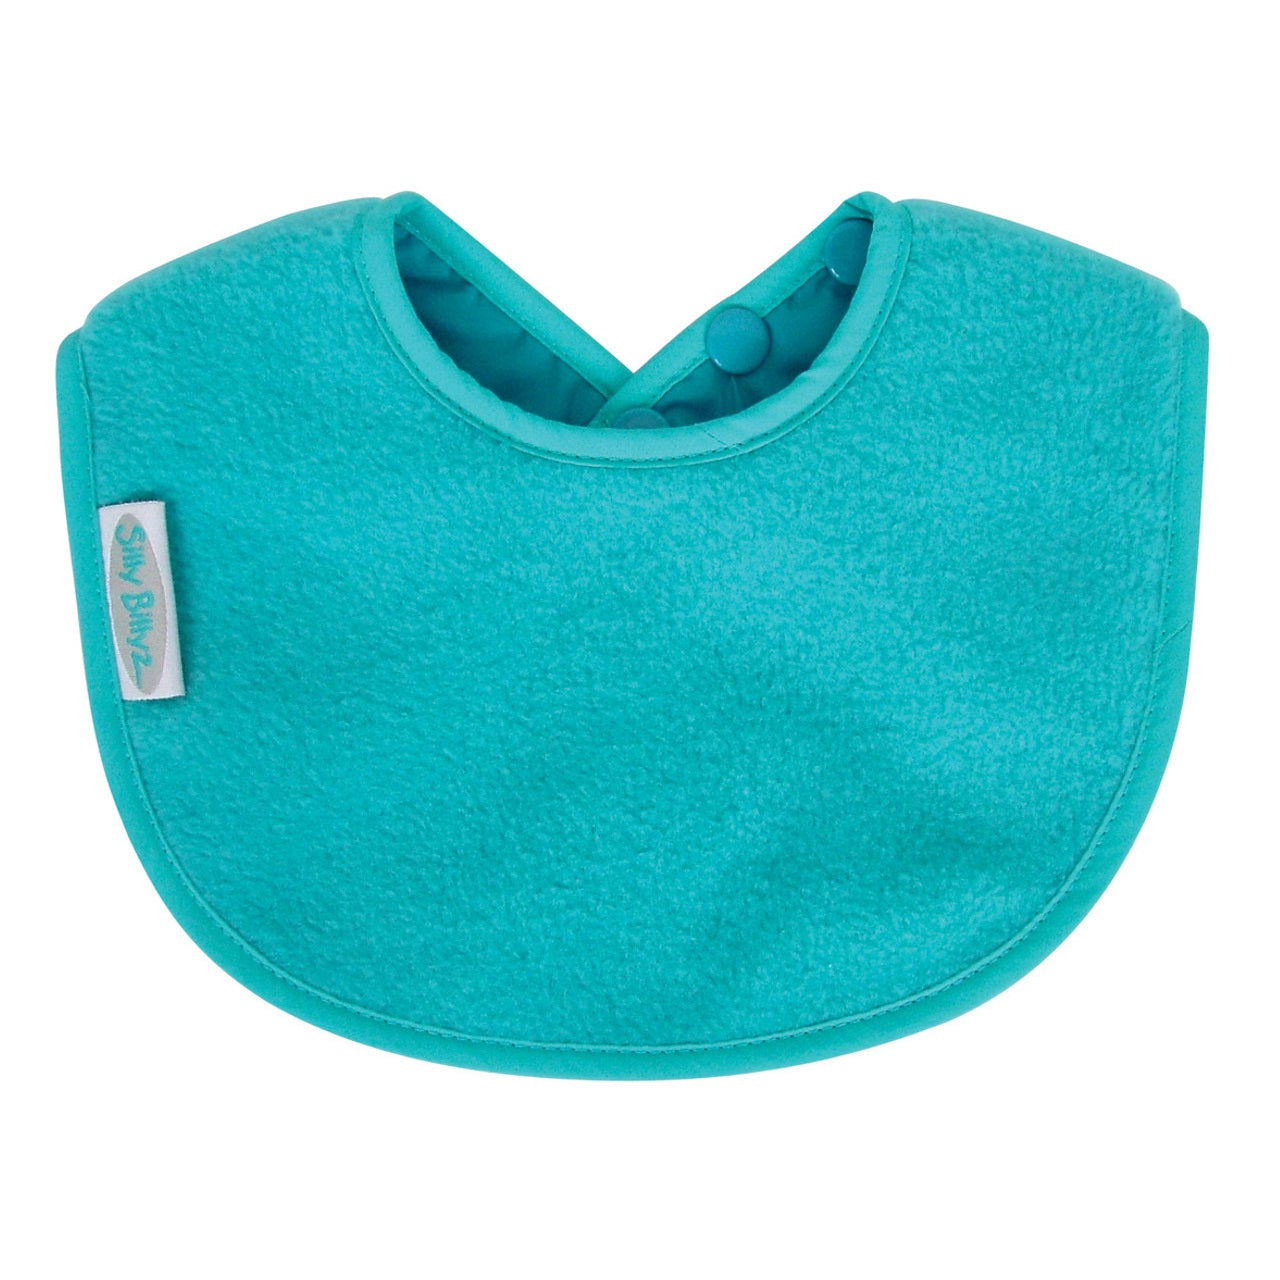 Silly Billyz waterproof Biblets are sized just right to be baby’s first bib. The absorbent fabrics will keep baby clean and dry, plus the triple snap closure means the Biblet grows with your baby.